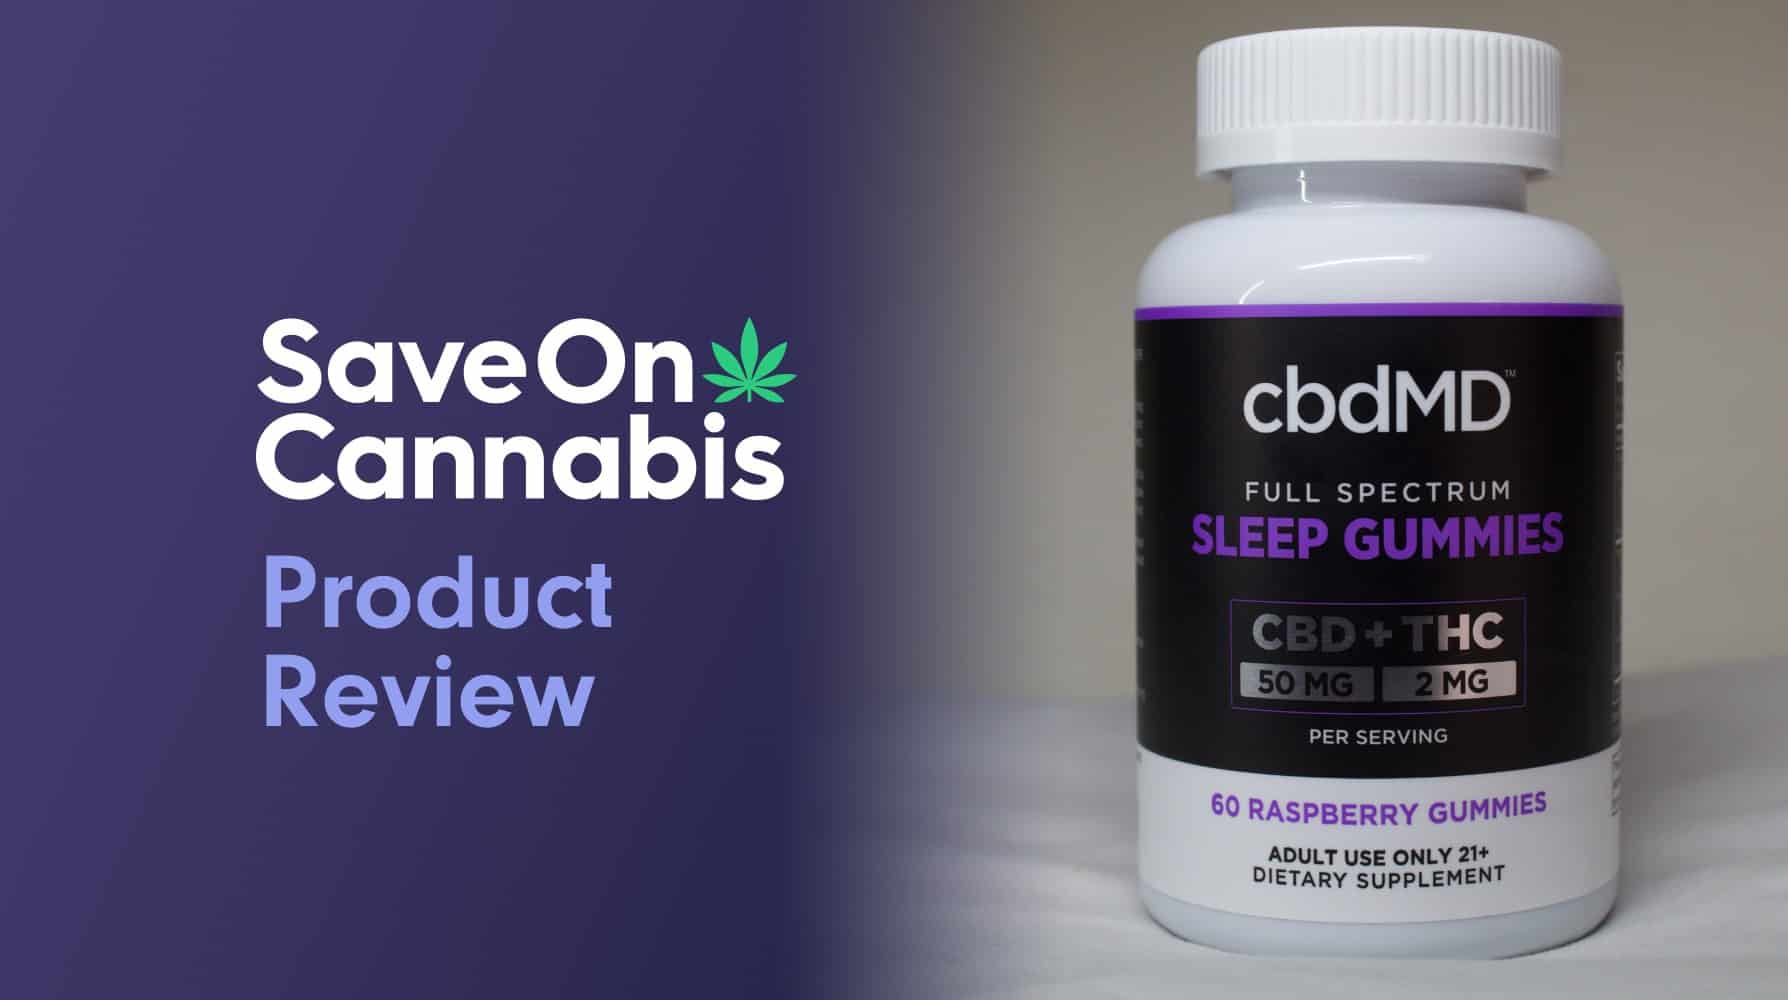 cbdMD Review - CBD & Delta 9 THC Gummies for Sleep - Featured Image - Save On Cannabis